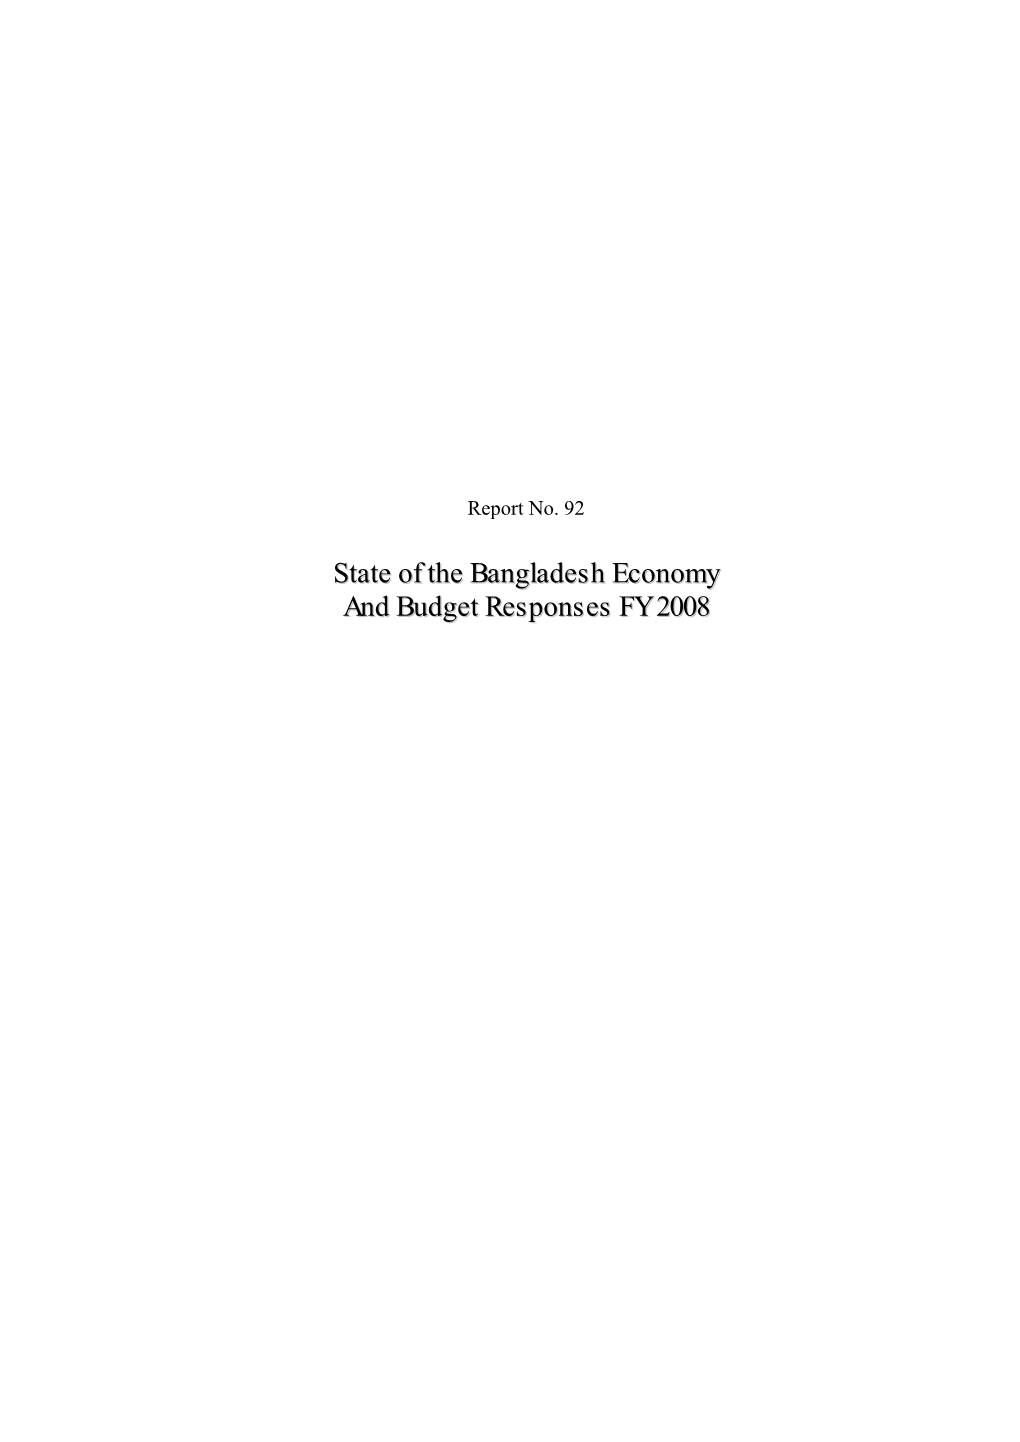 State of the Bangladesh Economy in FY06